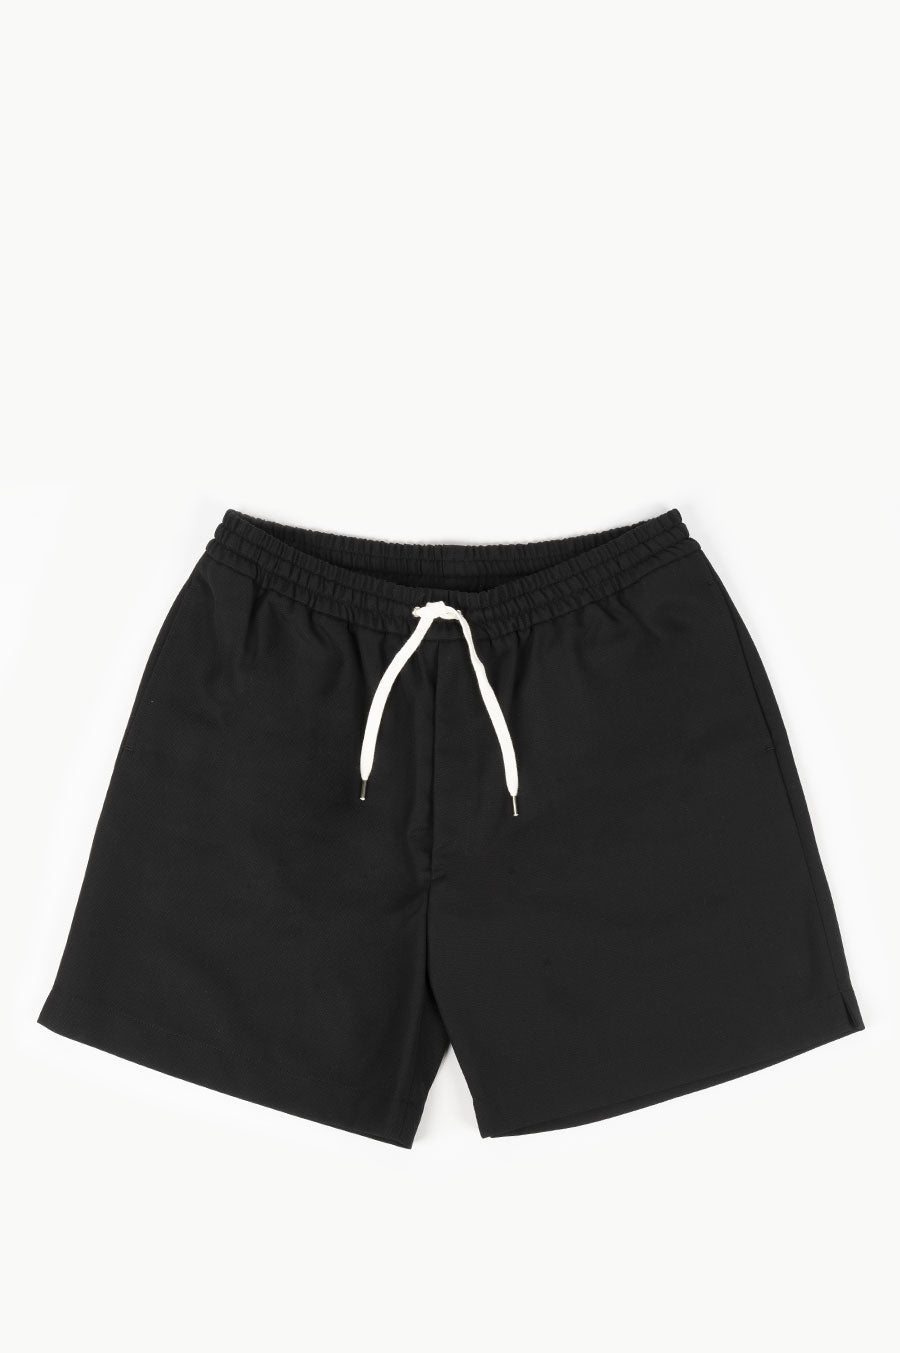 SECOND LAYER BAGGY SHORTS BLACK